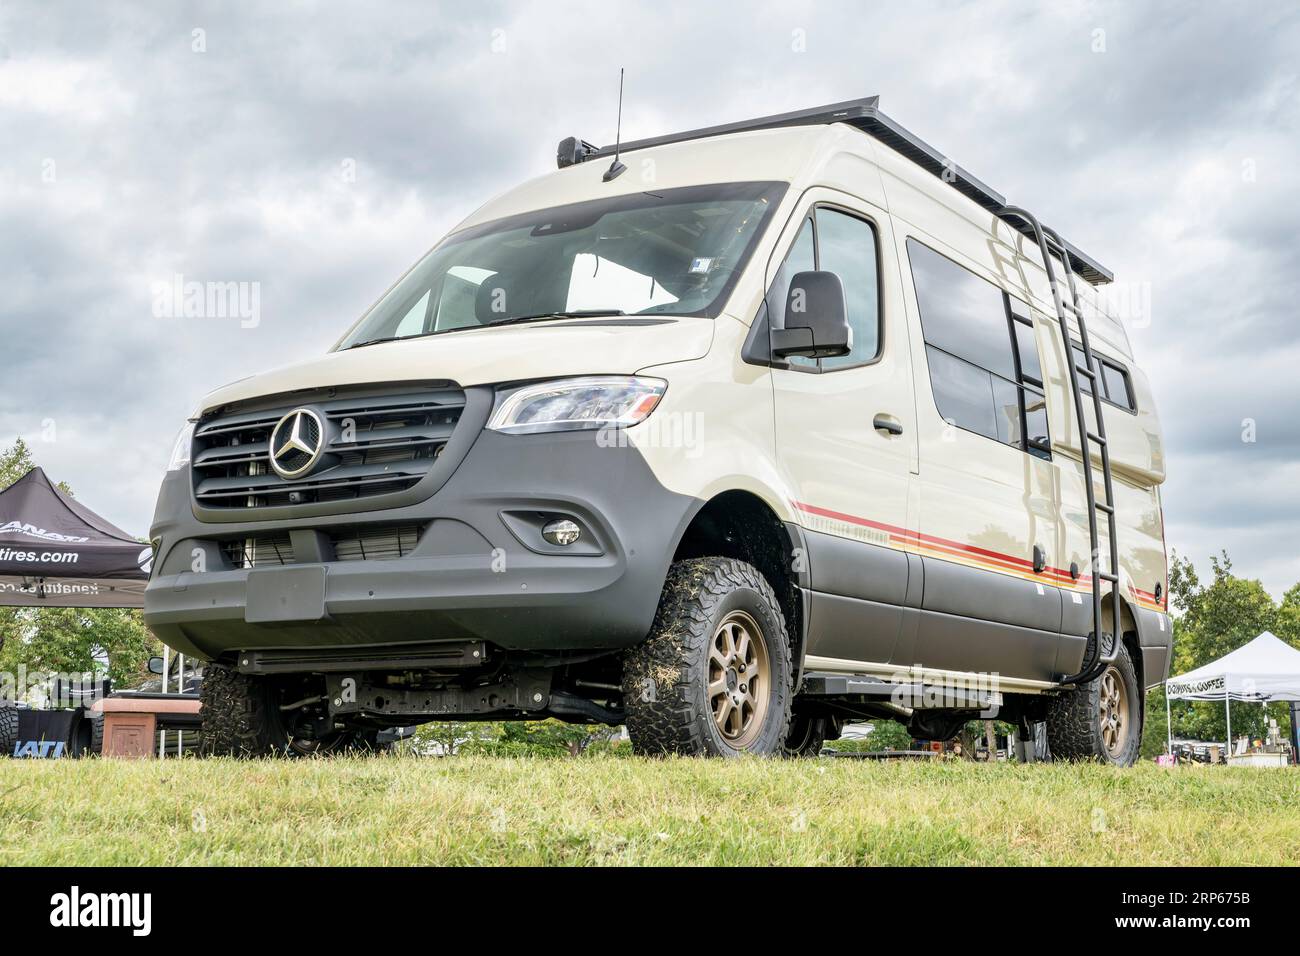 Loveland, CO, USA - August 25, 2023: Storyteller Overland Mode, 4x4 camper van on Mercedes Sprinter chassis at a busy campground. Stock Photo